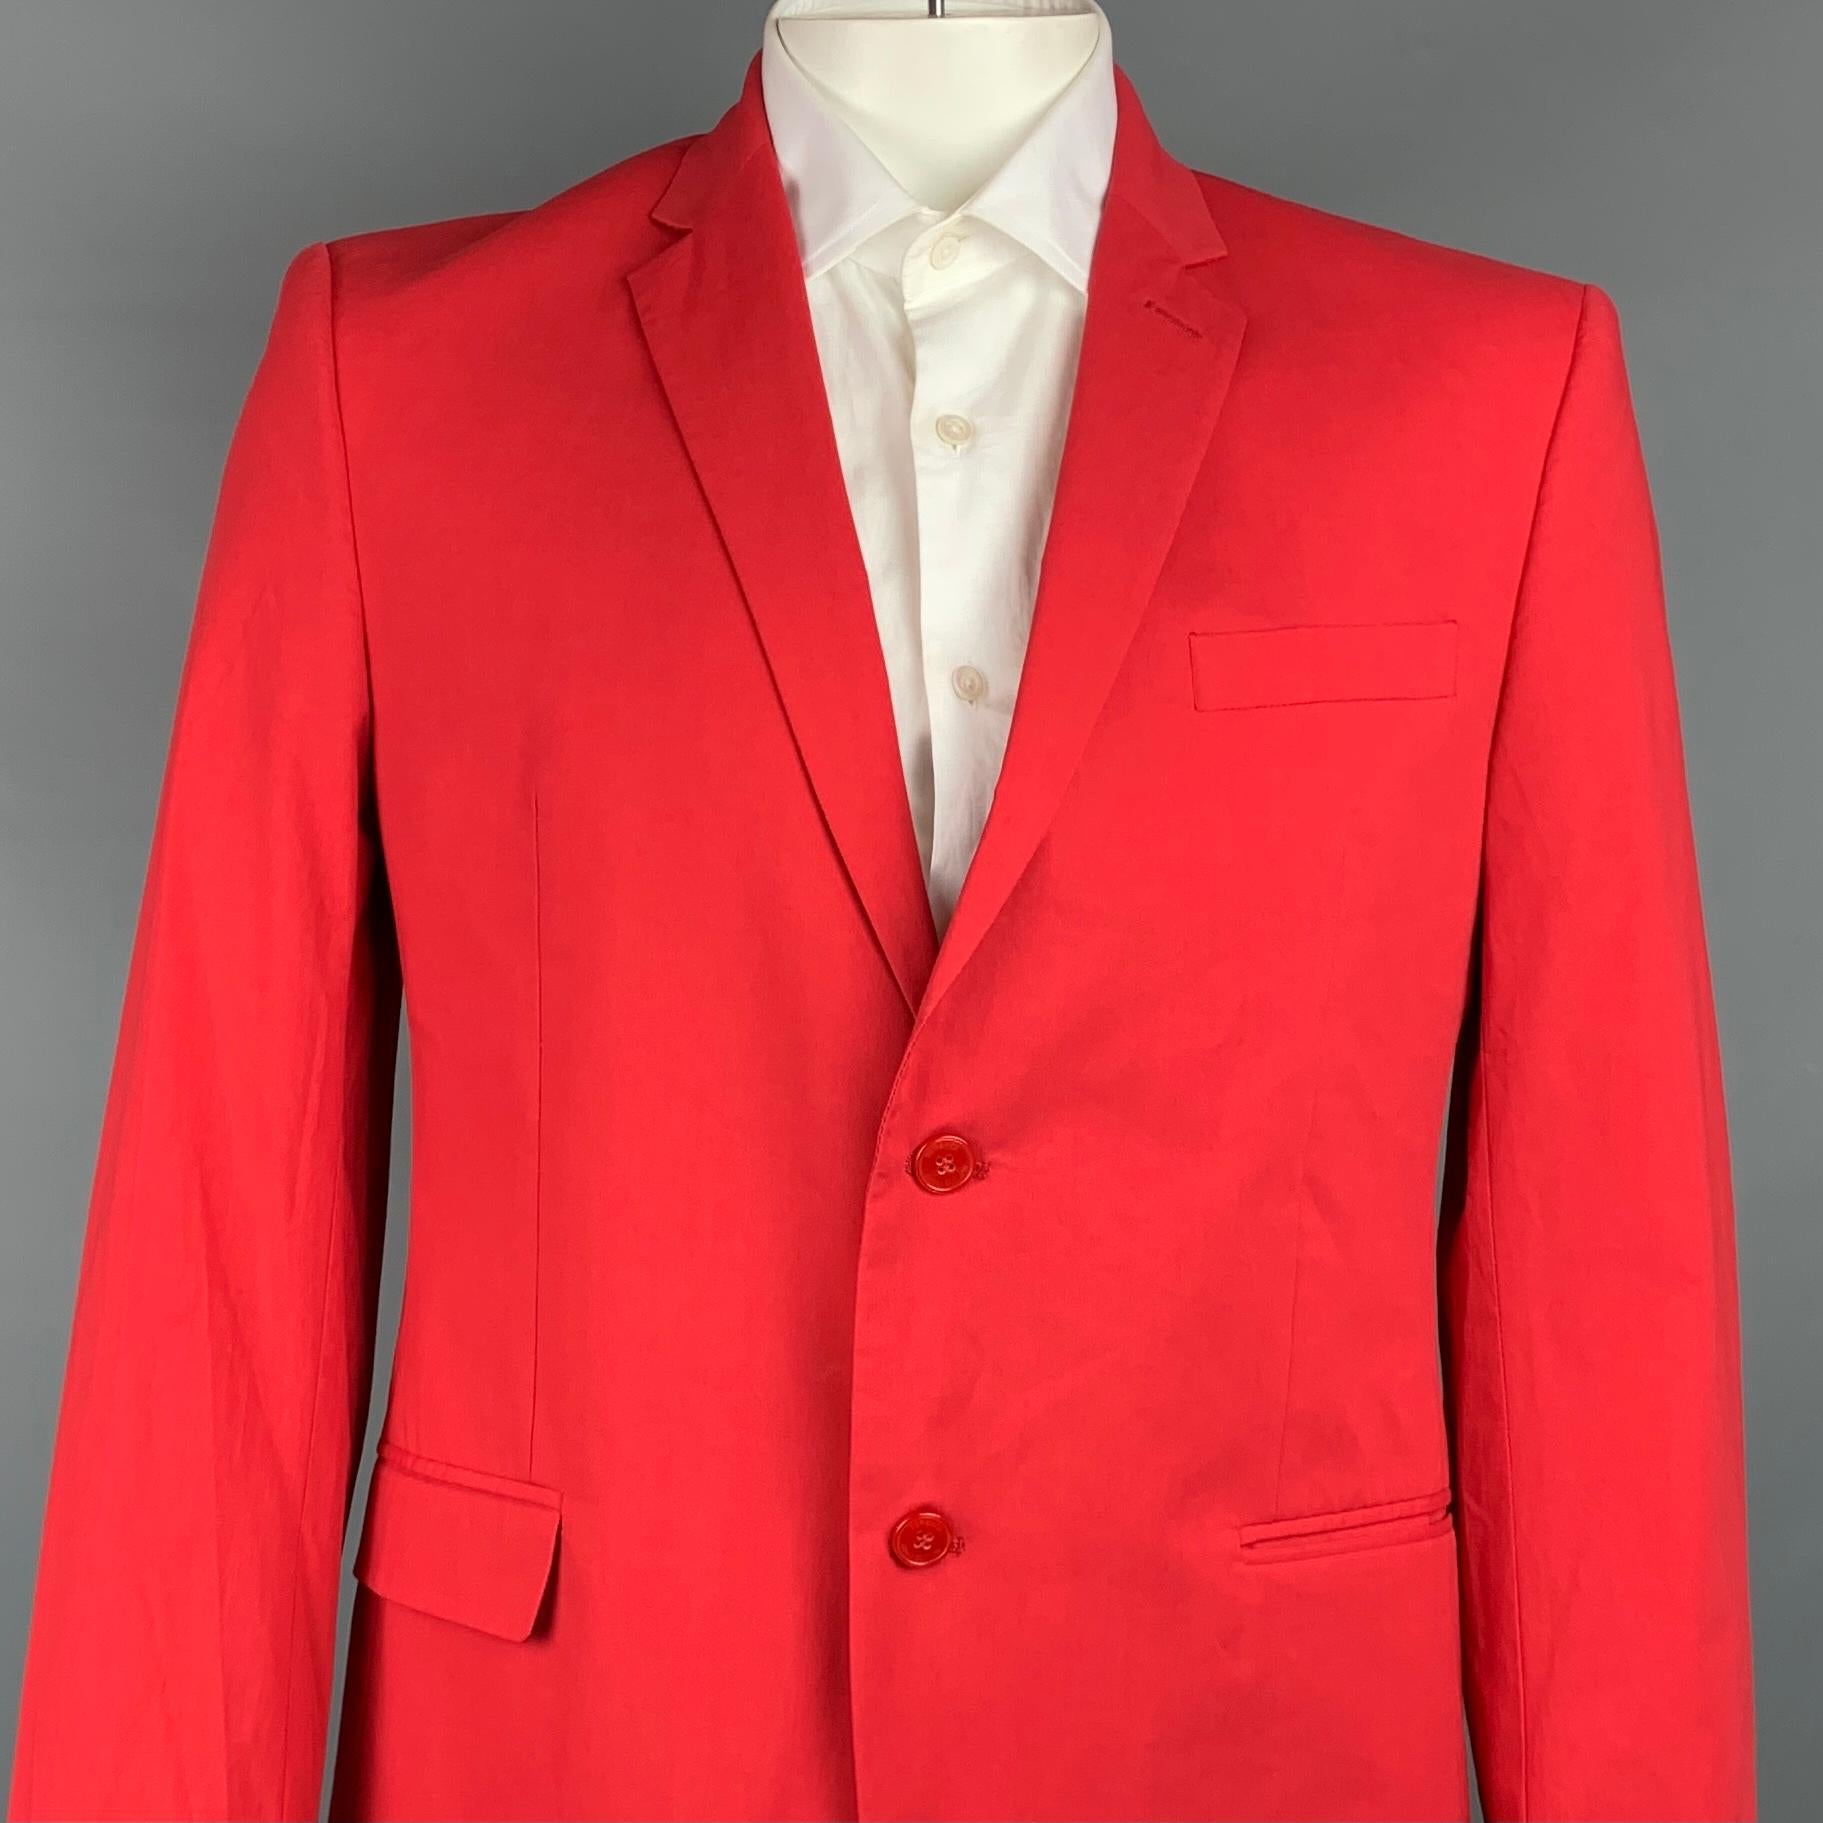 VERSACE COLLECTION sport coat comes in a red cotton with a full monogram print liner featuring a notch lapel, slit pockets, and a double button closure. Made in Romania.

Very Good Pre-Owned Condition.
Marked: 54

Measurements:

Shoulder: 18.5